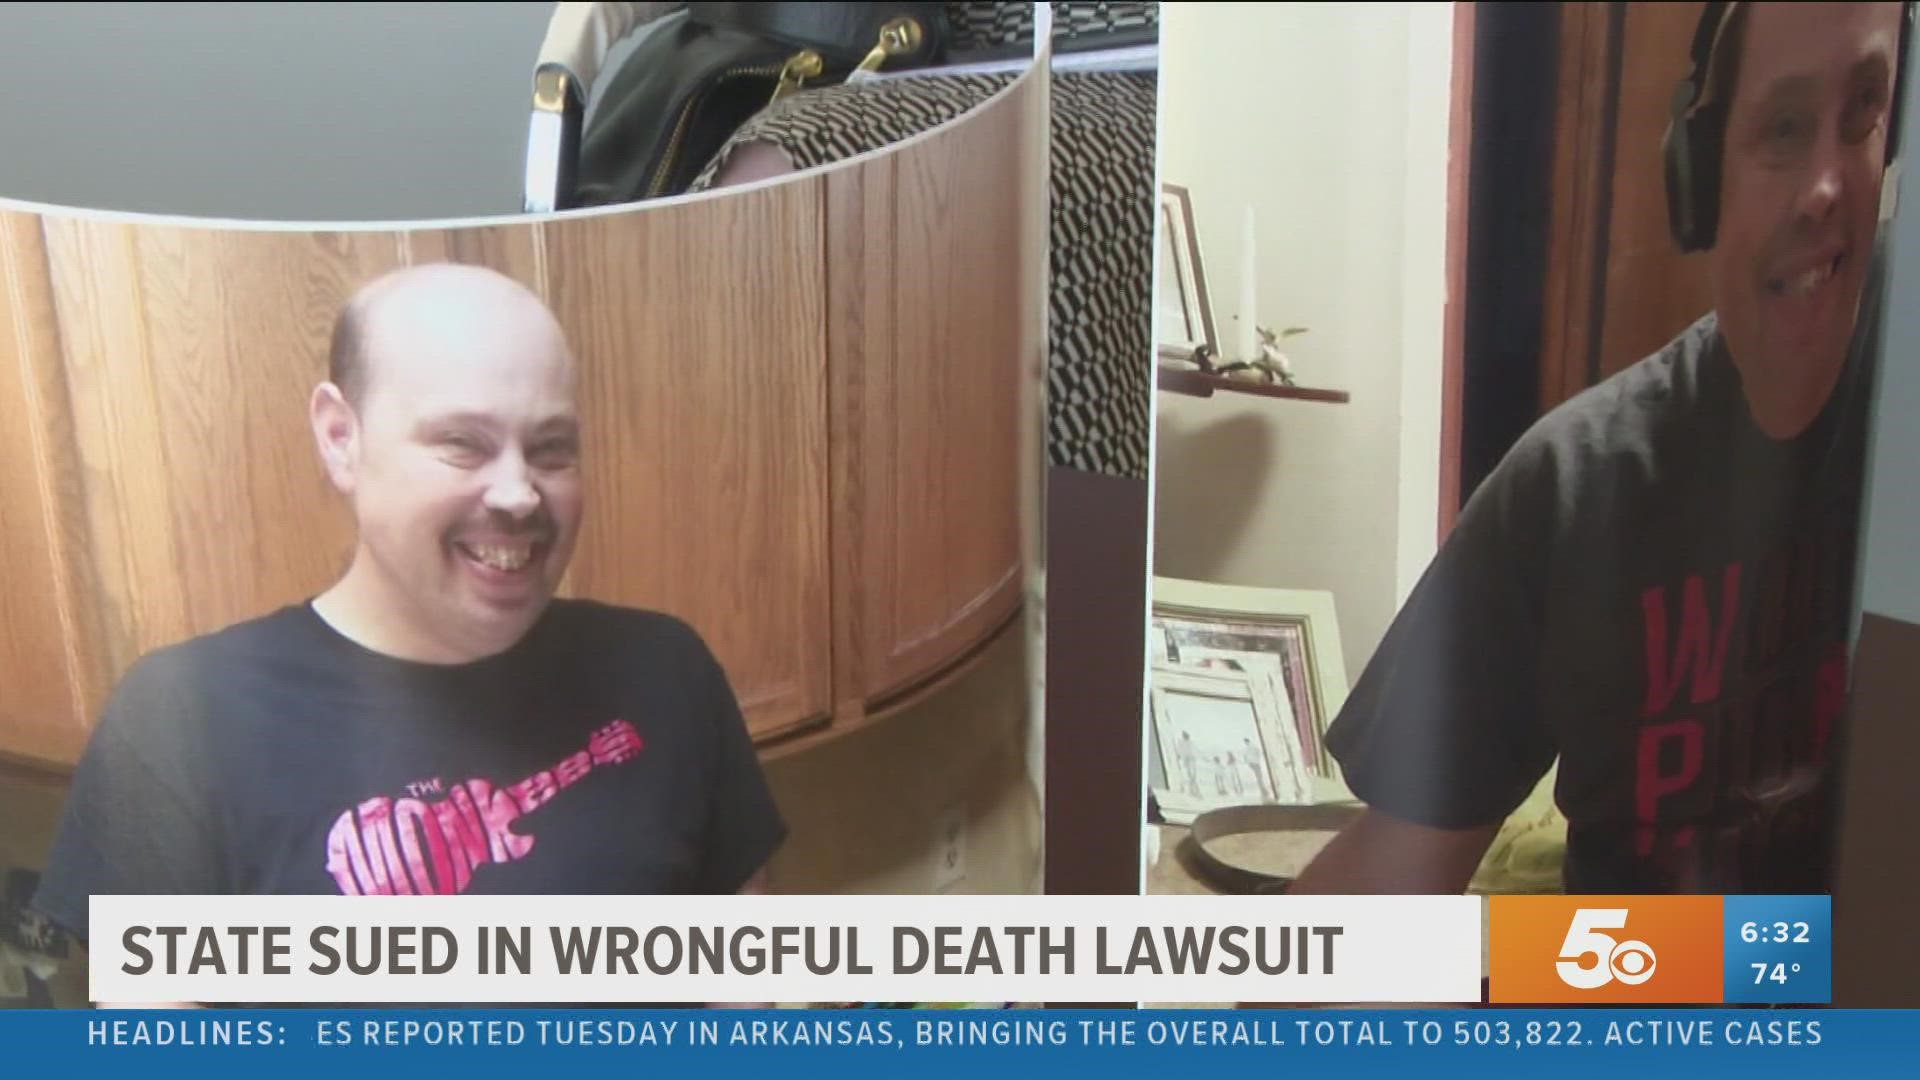 The family of 42-year-old David Cains is suing the Arkansas Department of Health for his wrongful death in June 2020 while in Booneville Human Development Center.